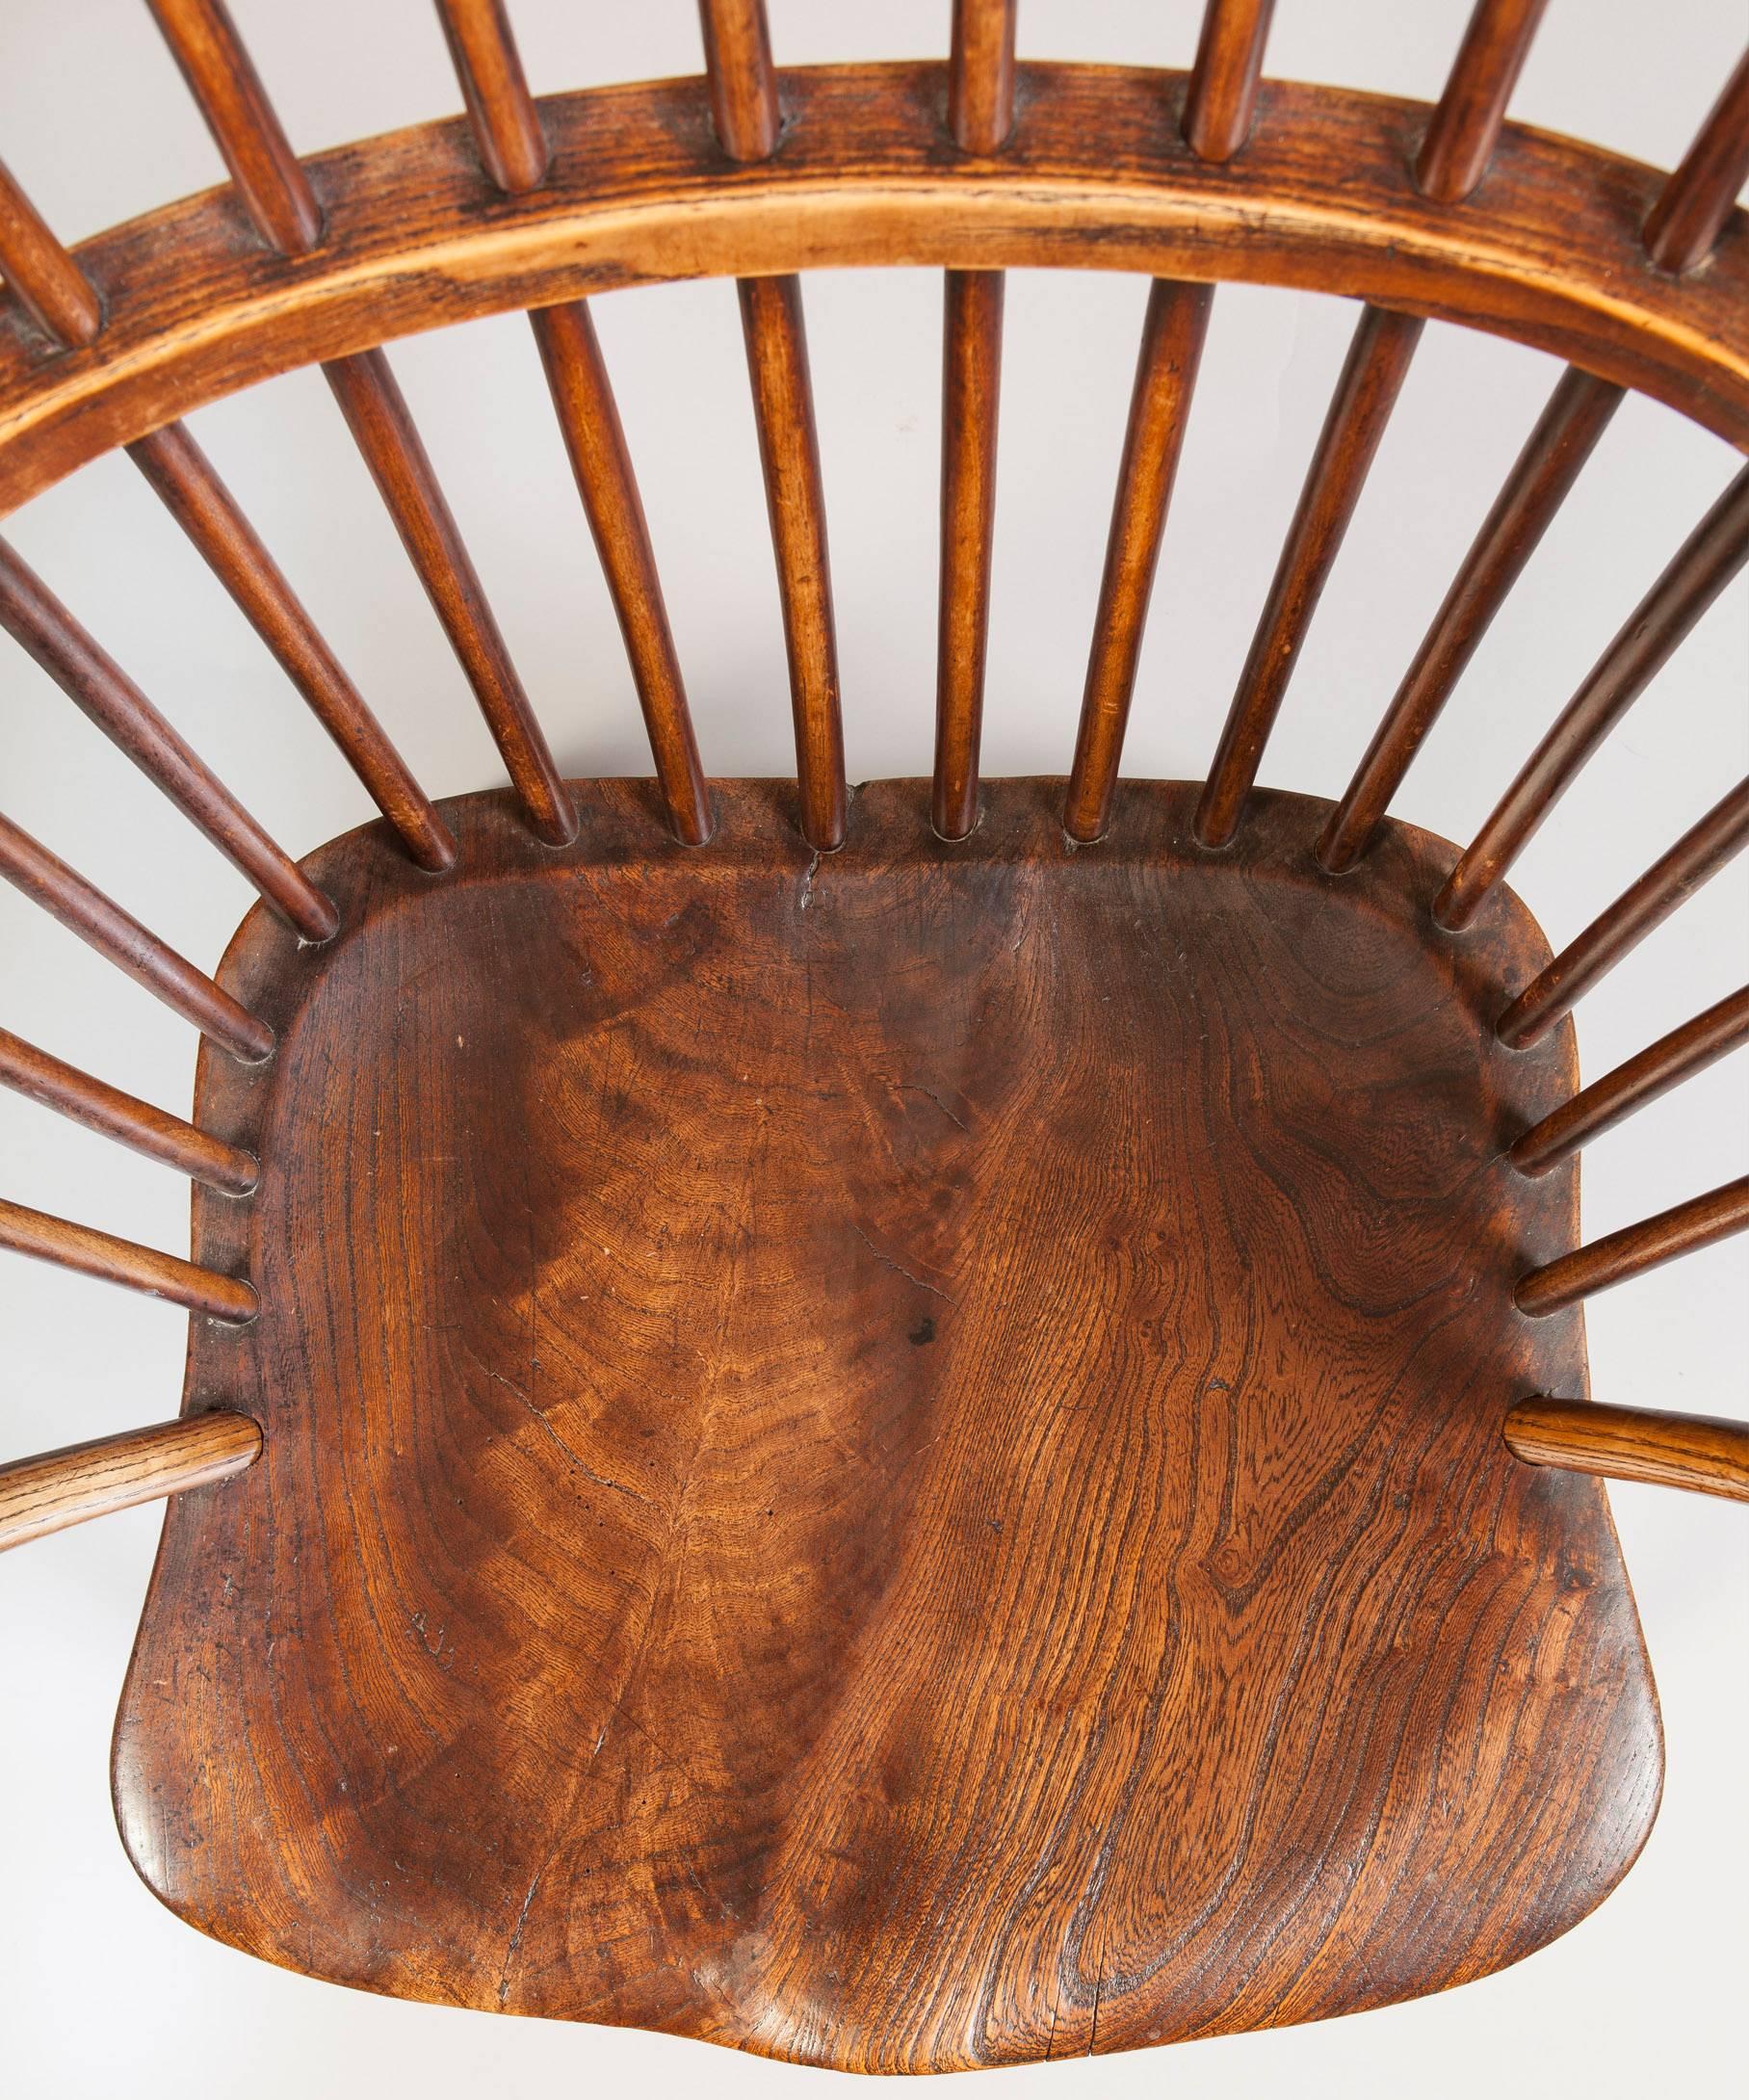 An early 19th century comb back armchair in the Welsh vernacular tradition; the armchair's curved fruitwood top rail above turned fruitwood spindles and ash arms; the armchair's comfortable seat is shaped from a beautifully figured piece of elm and